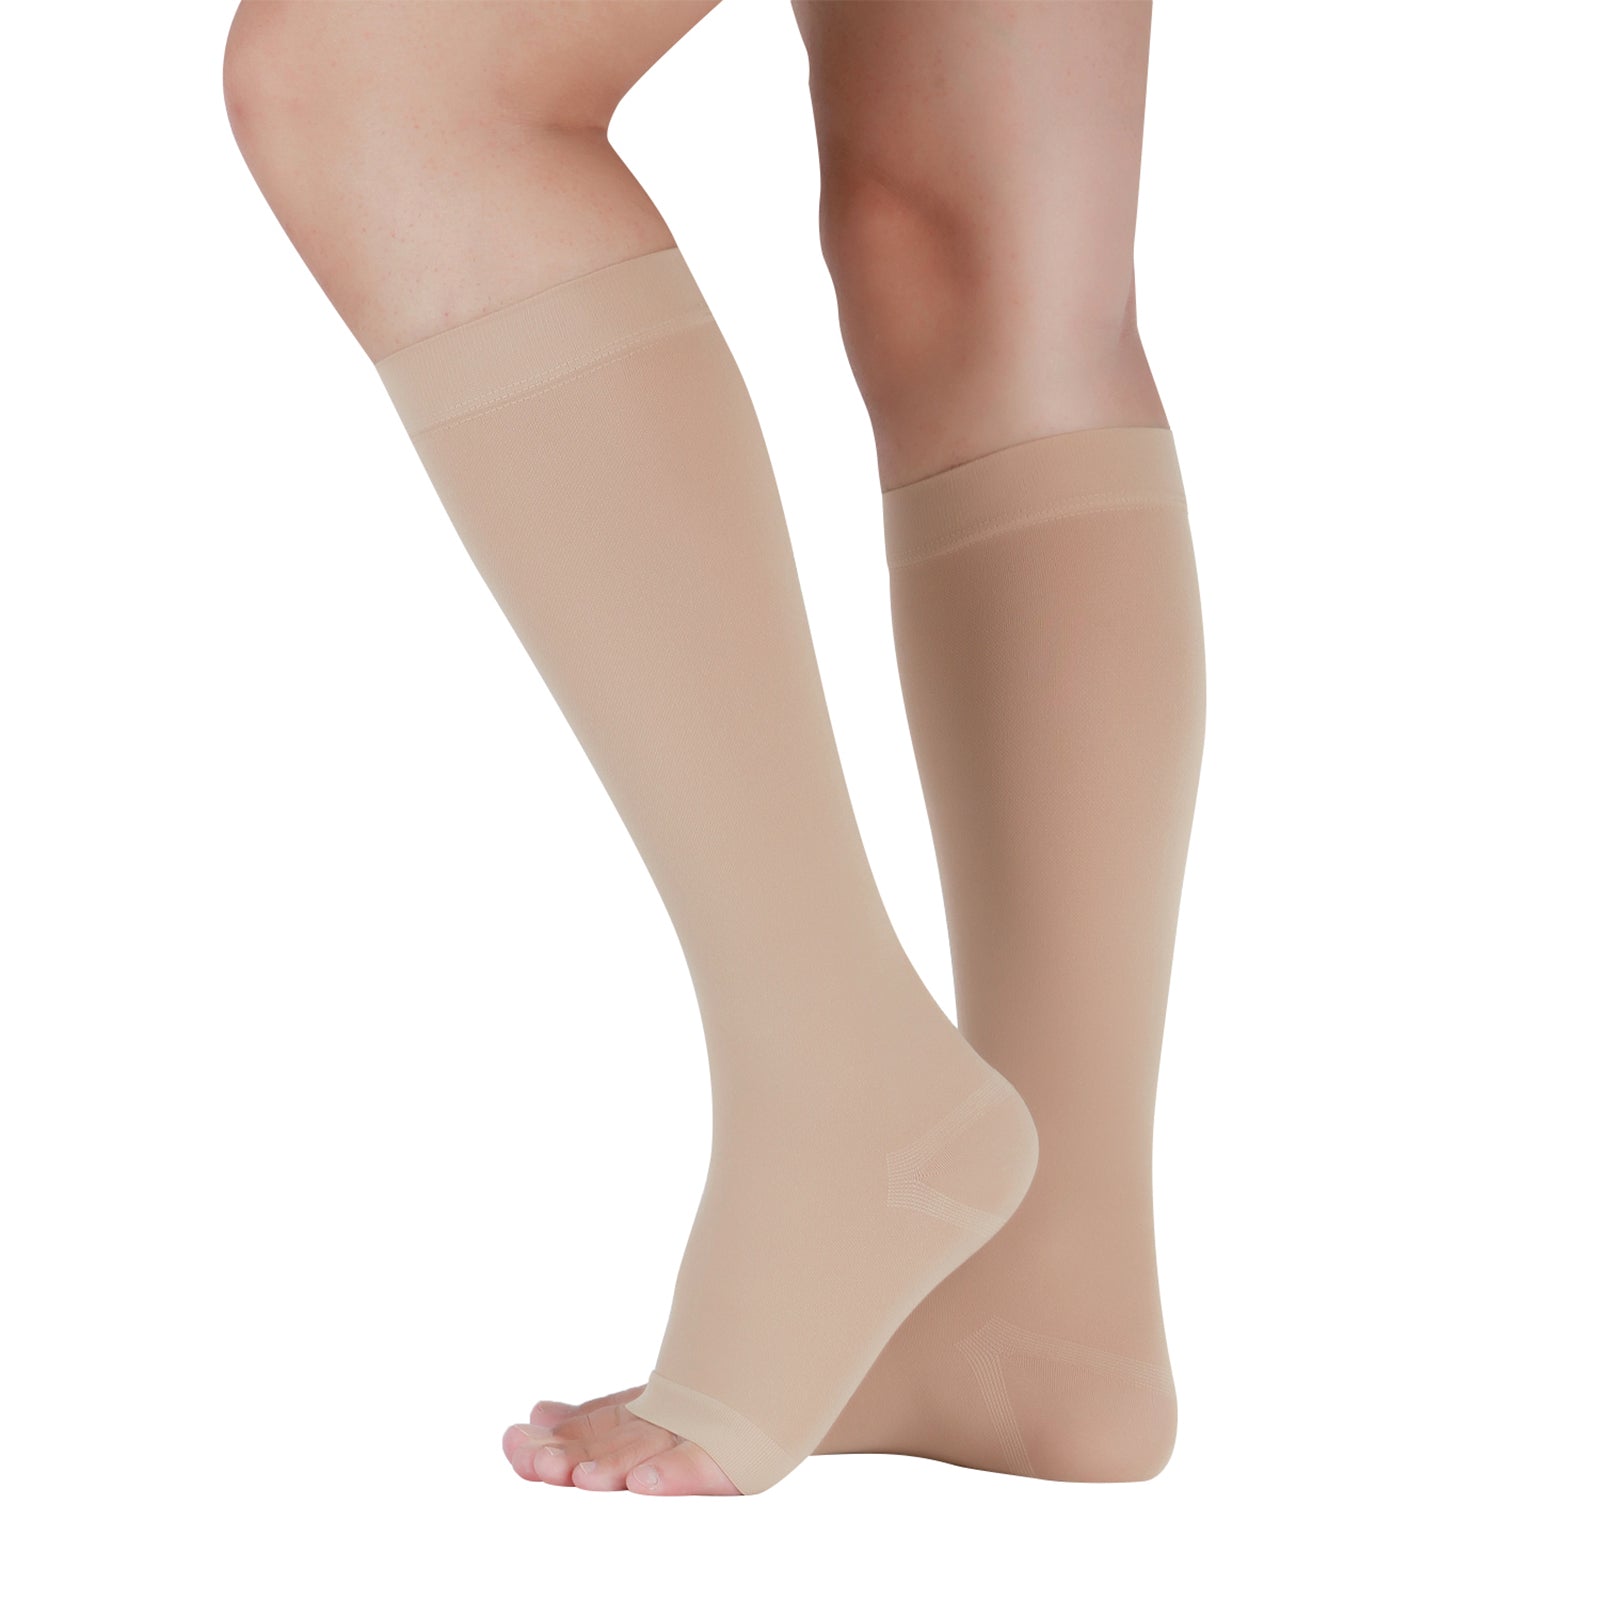  +MD Men and Women Medical Compression Socks Microfiber Opaque  Graduated 15-20 mmHg Knee High Support Stockings-Swelling, Varicose Veins,  Thrombosis NudeM : Health & Household